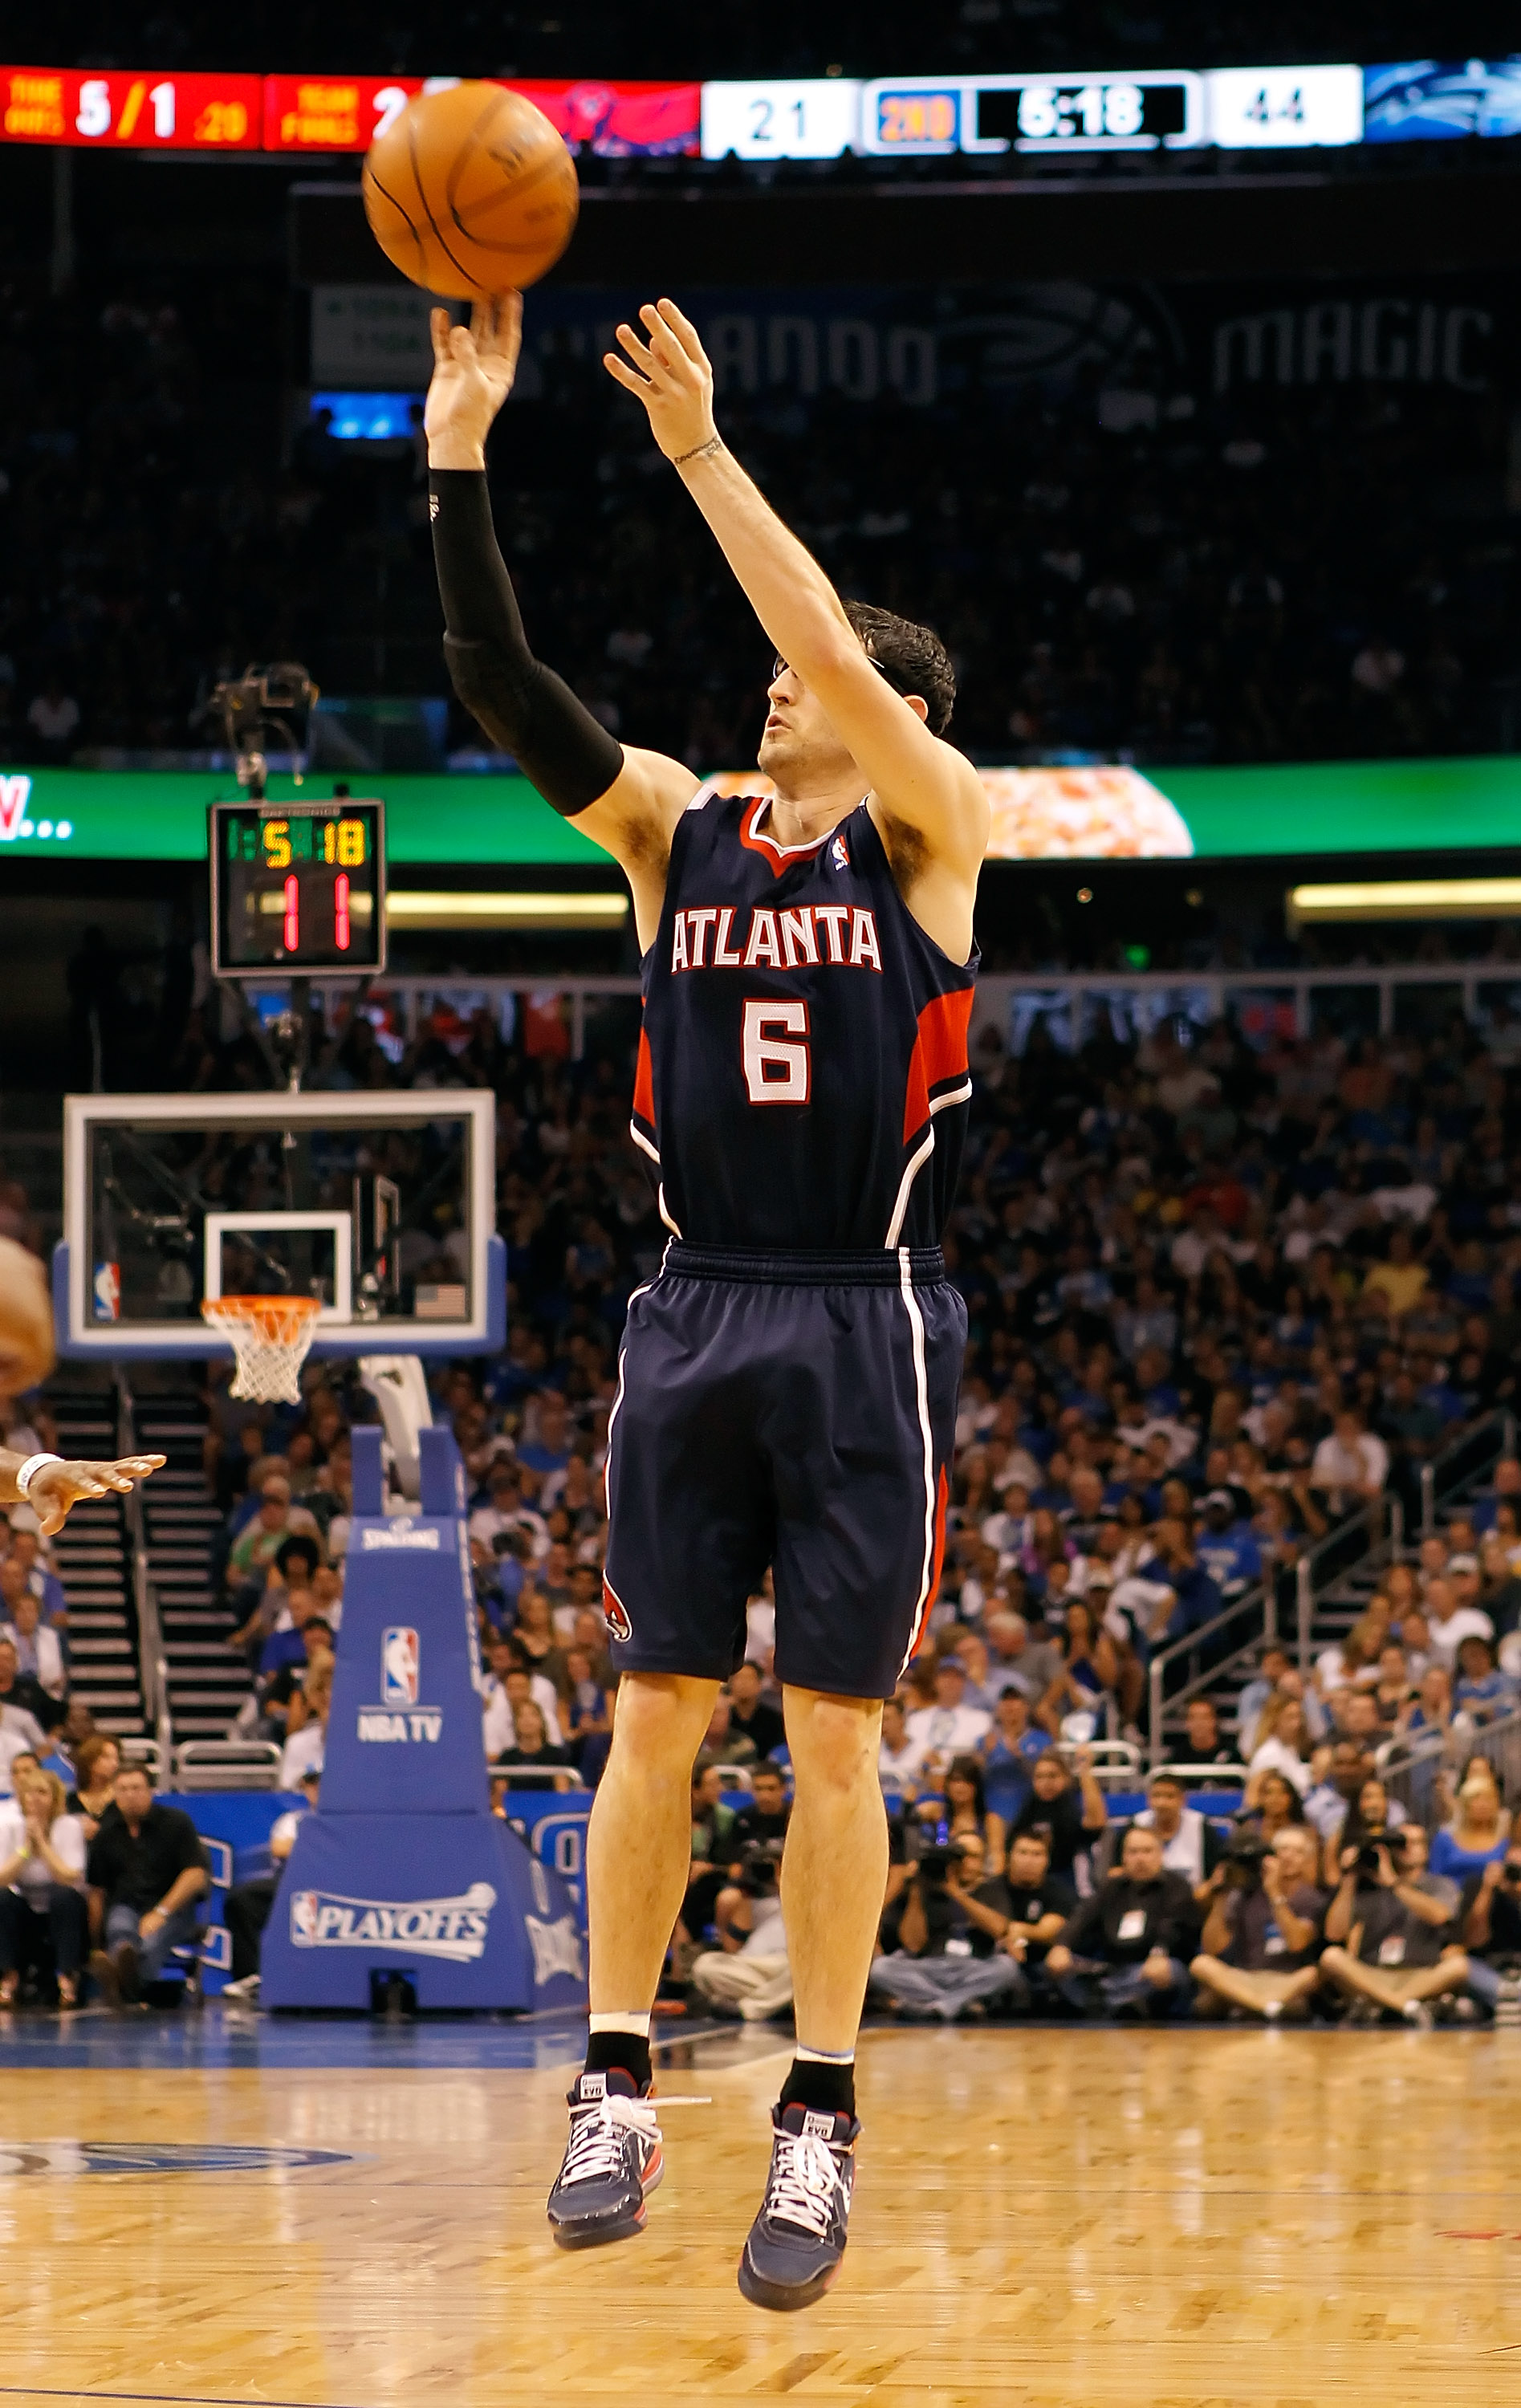 ORLANDO, FL - APRIL 26:  Kirk Hinrich #6 of the Atlanta Hawks shoots against the Orlando Magic during Game Five of the Eastern Conference Quarterfinals of the 2011 NBA Playoffs on April 26, 2011 at the Amway Arena in Orlando, Florida.  NOTE TO USER: User